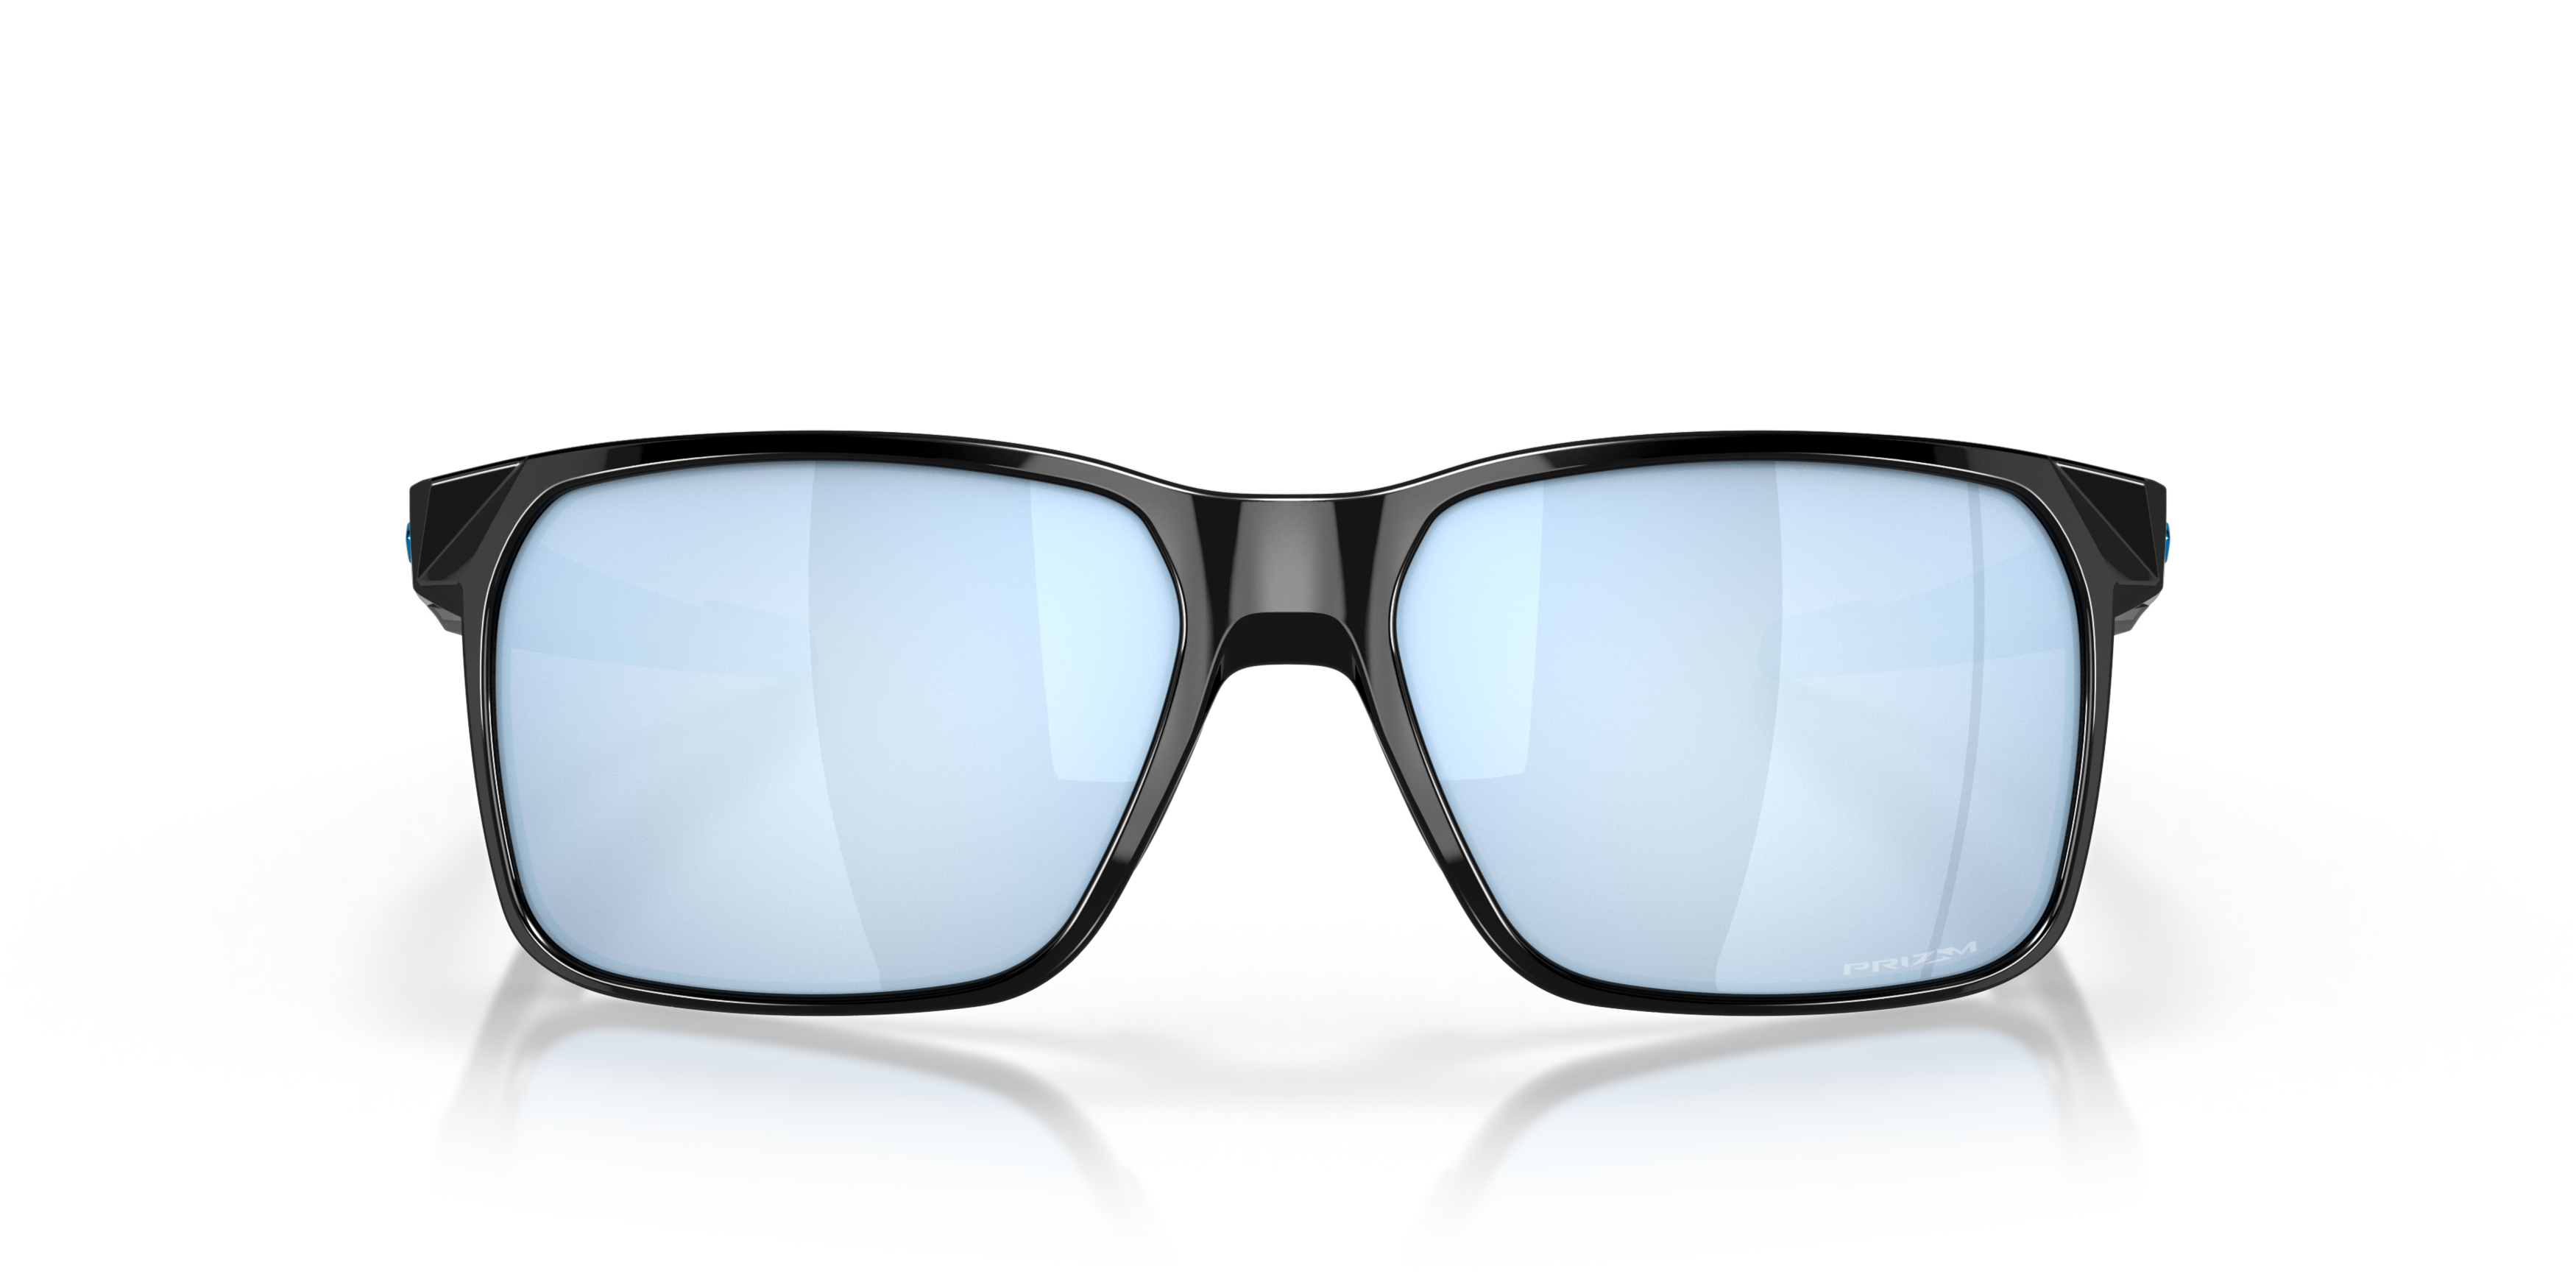 [products.image.front] Oakley OO9460 946004